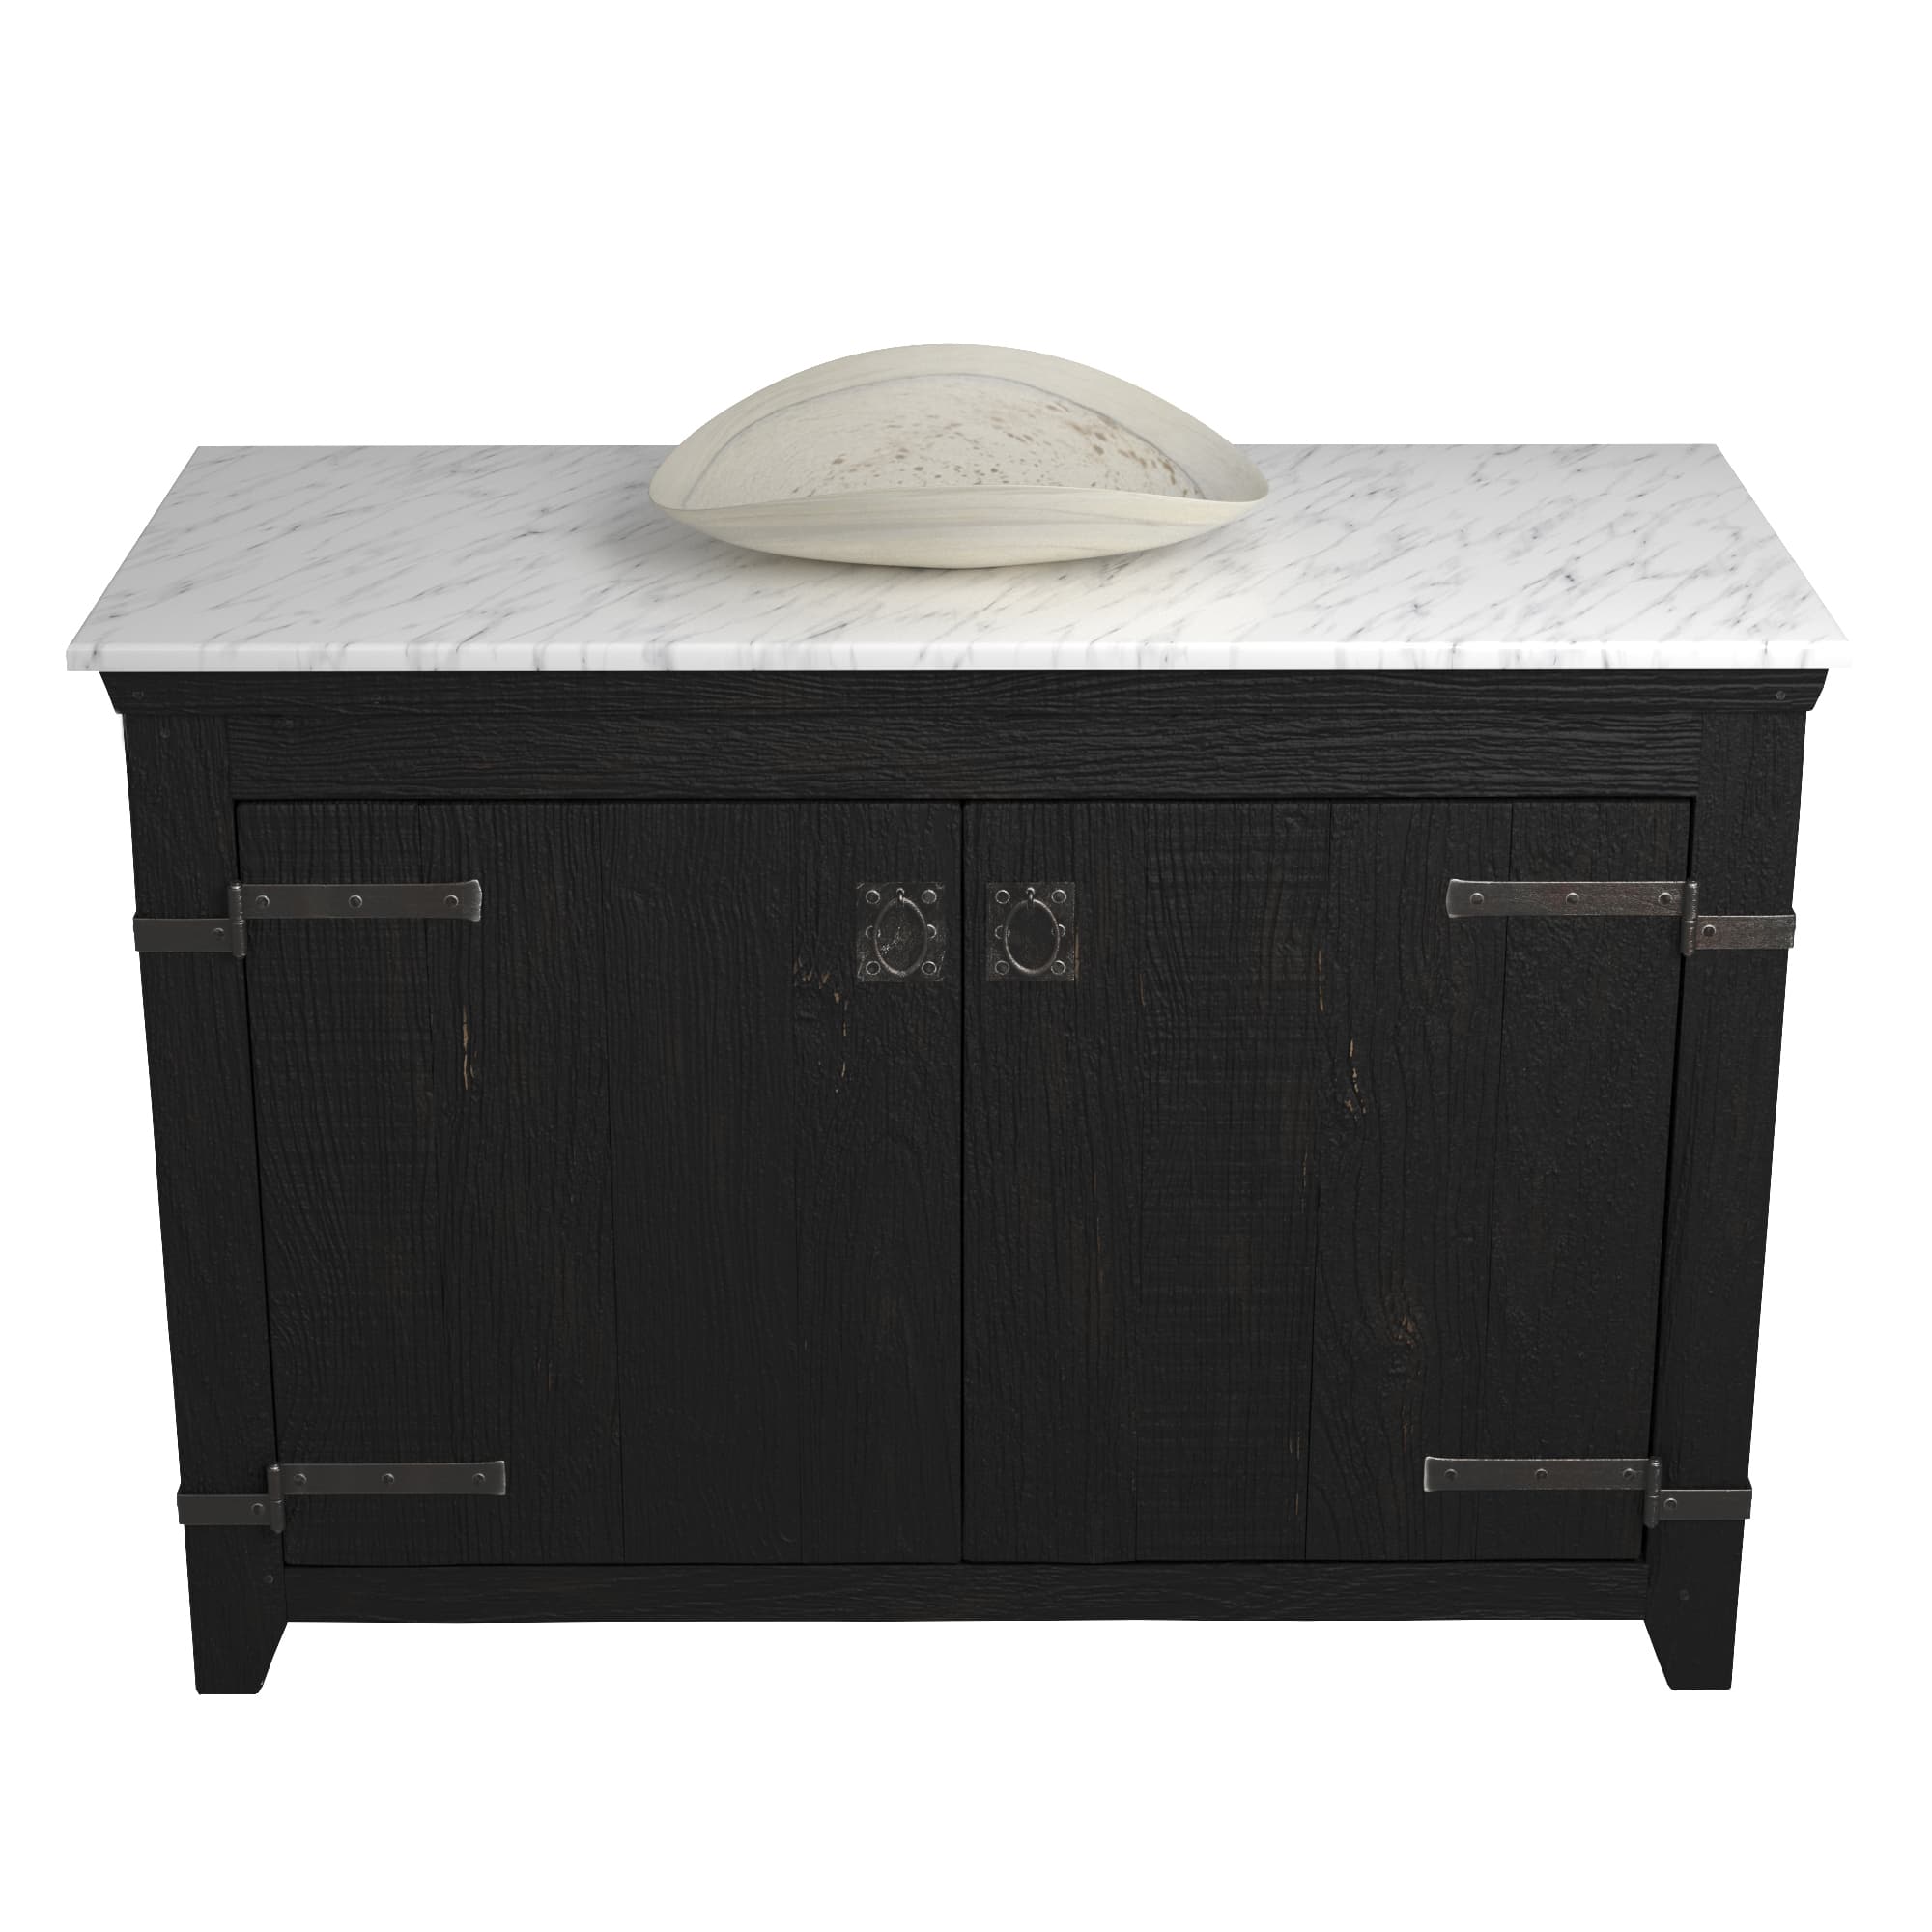 Native Trails 48" Americana Vanity in Anvil with Carrara Marble Top and Sorrento in Beachcomber, Single Faucet Hole, BND48-VB-CT-MG-109